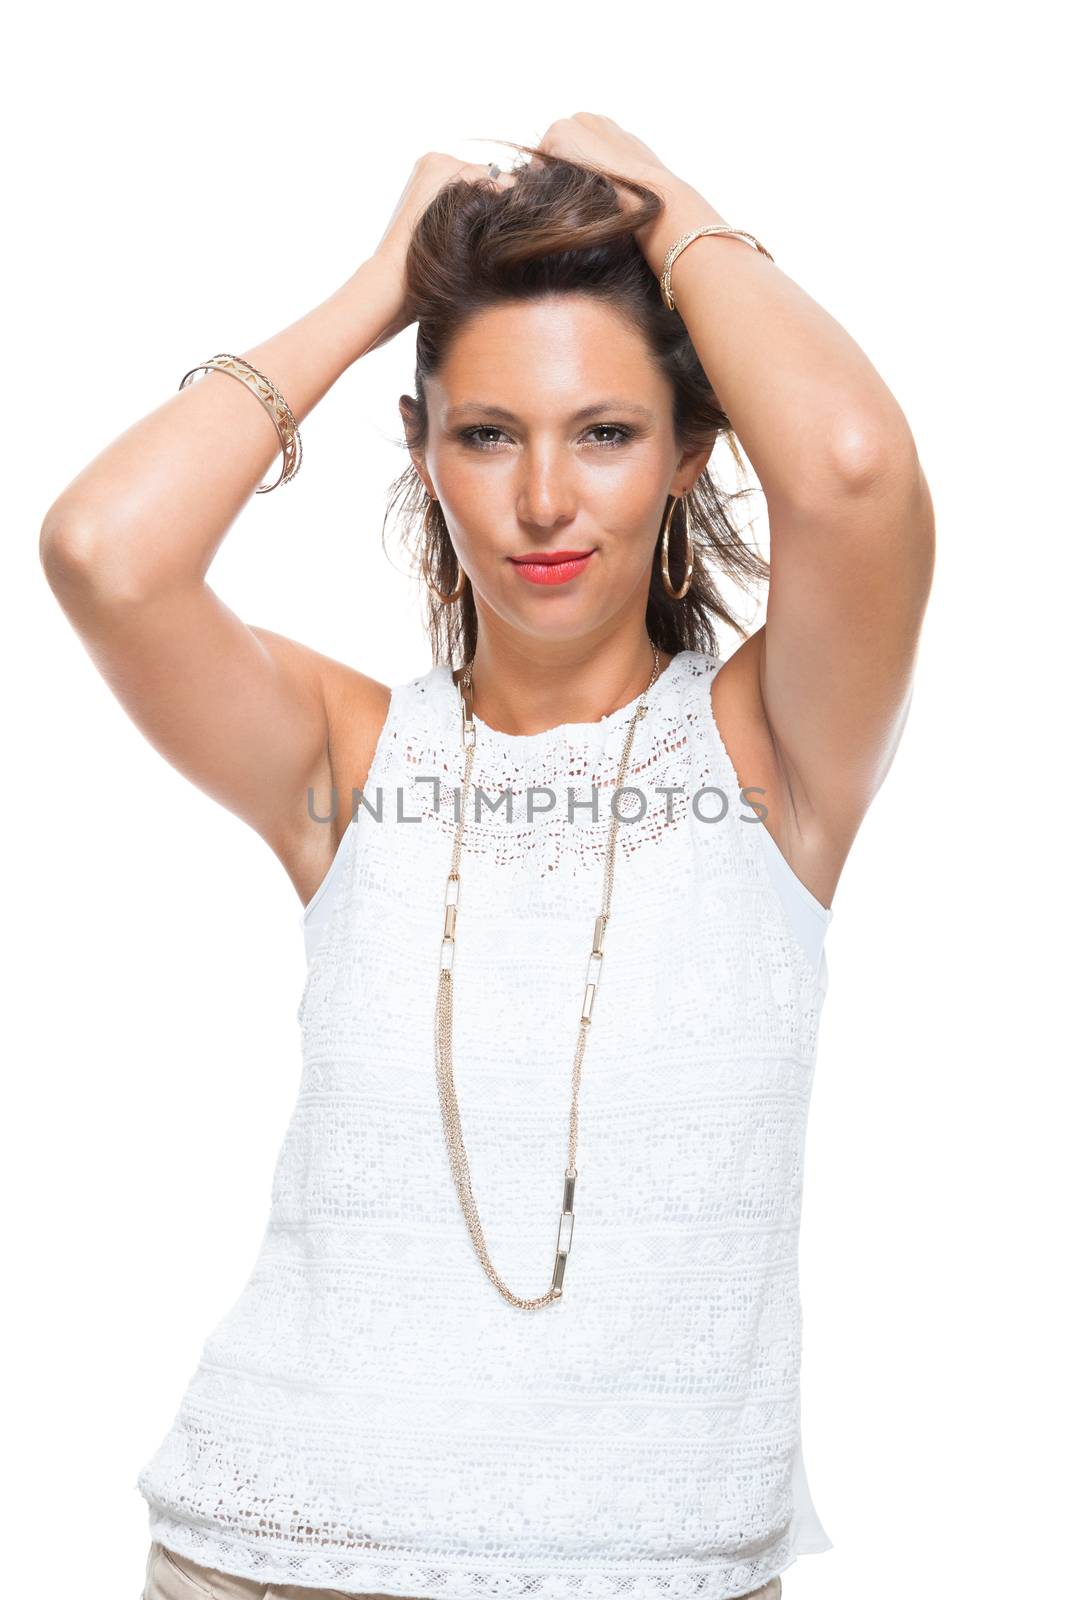 Happy Woman in Trendy Outfit Holding her Hair Up by juniart